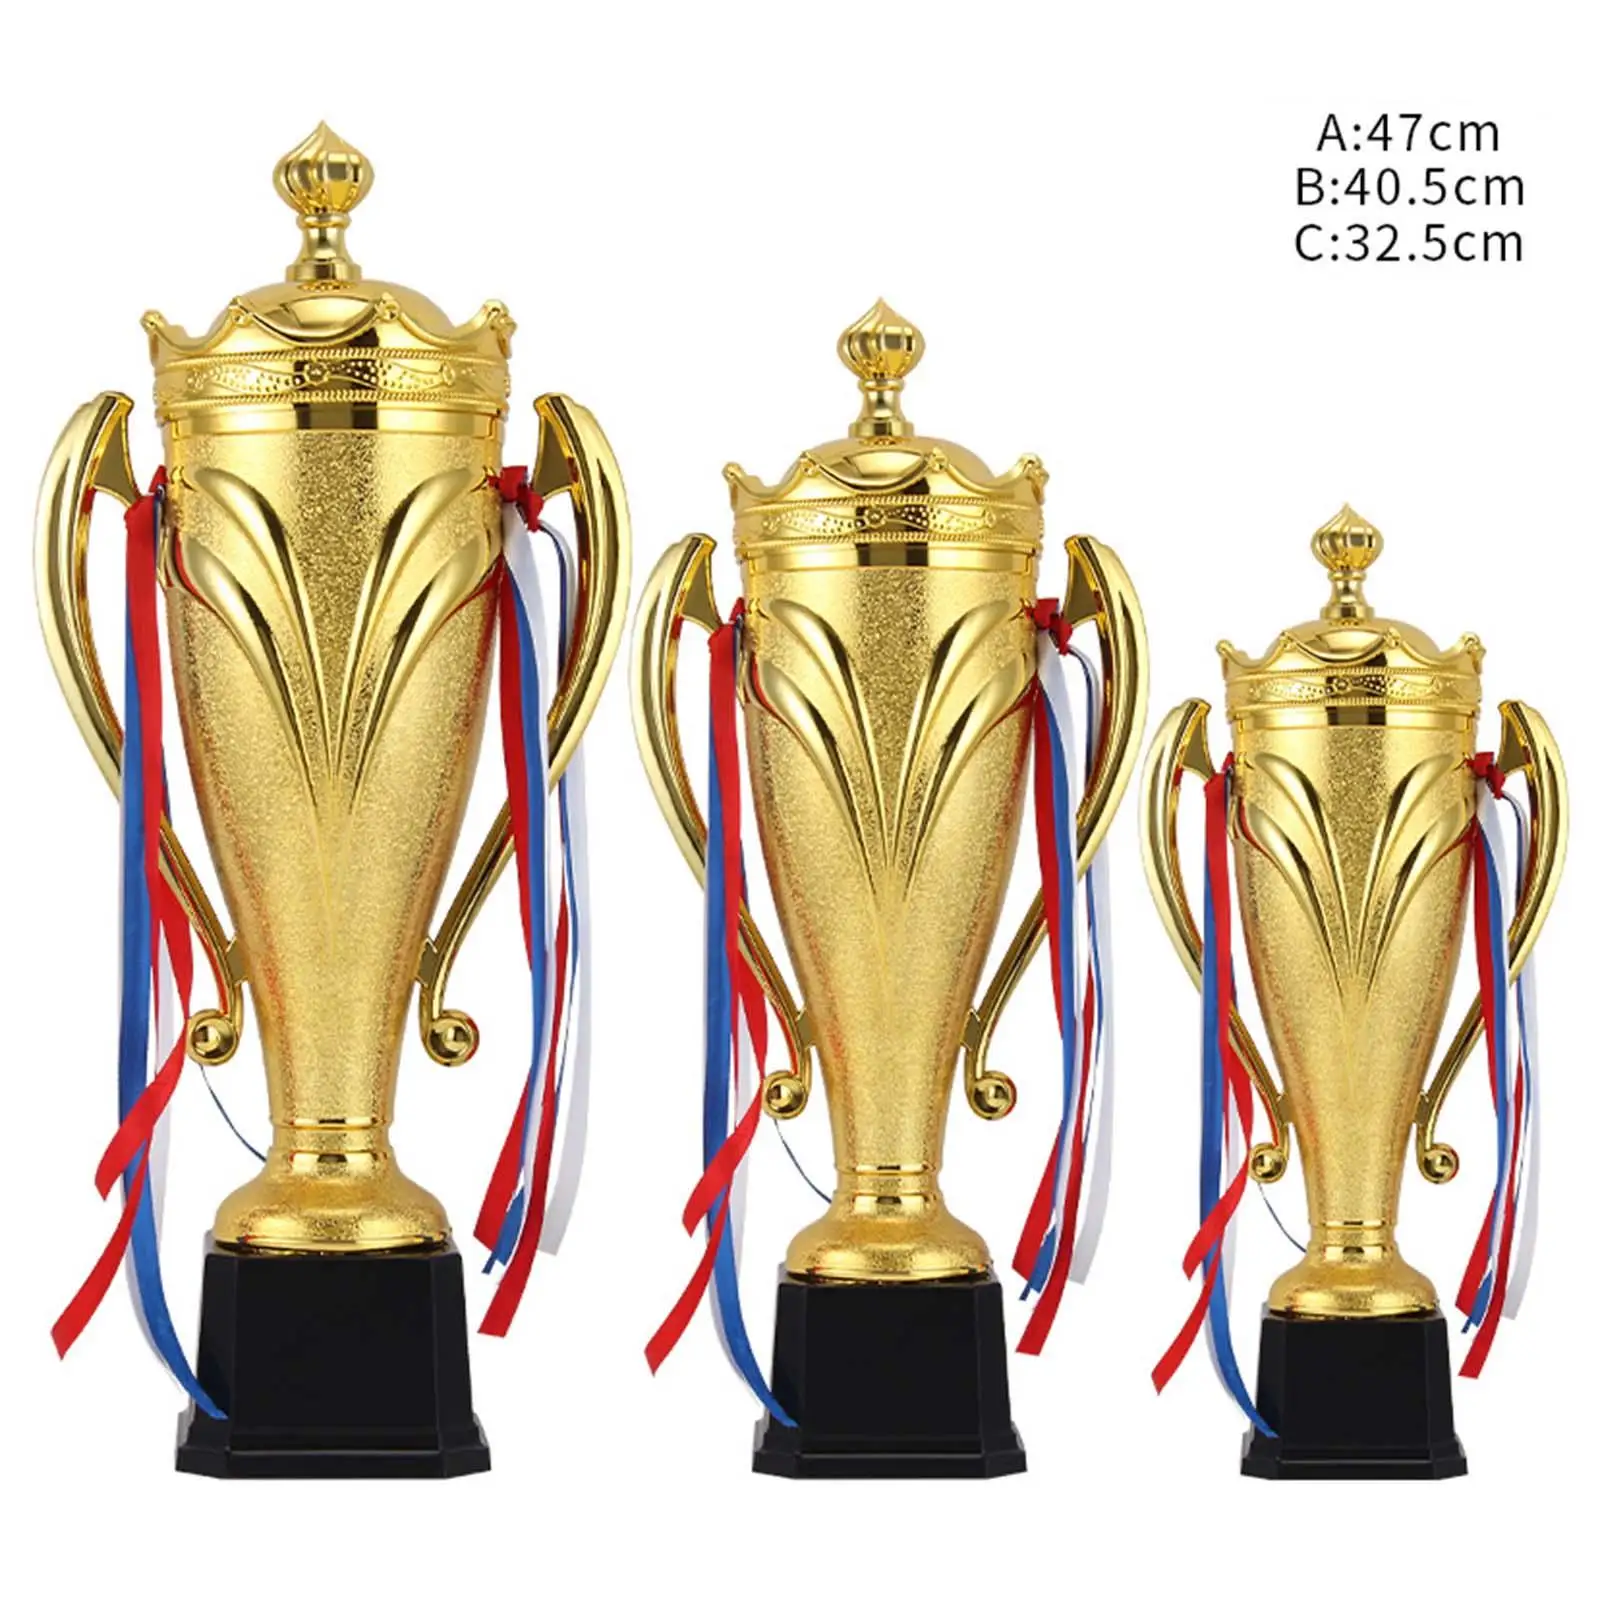 PP Material Winner Award Trophies Cup Gold Color for Children Competitions